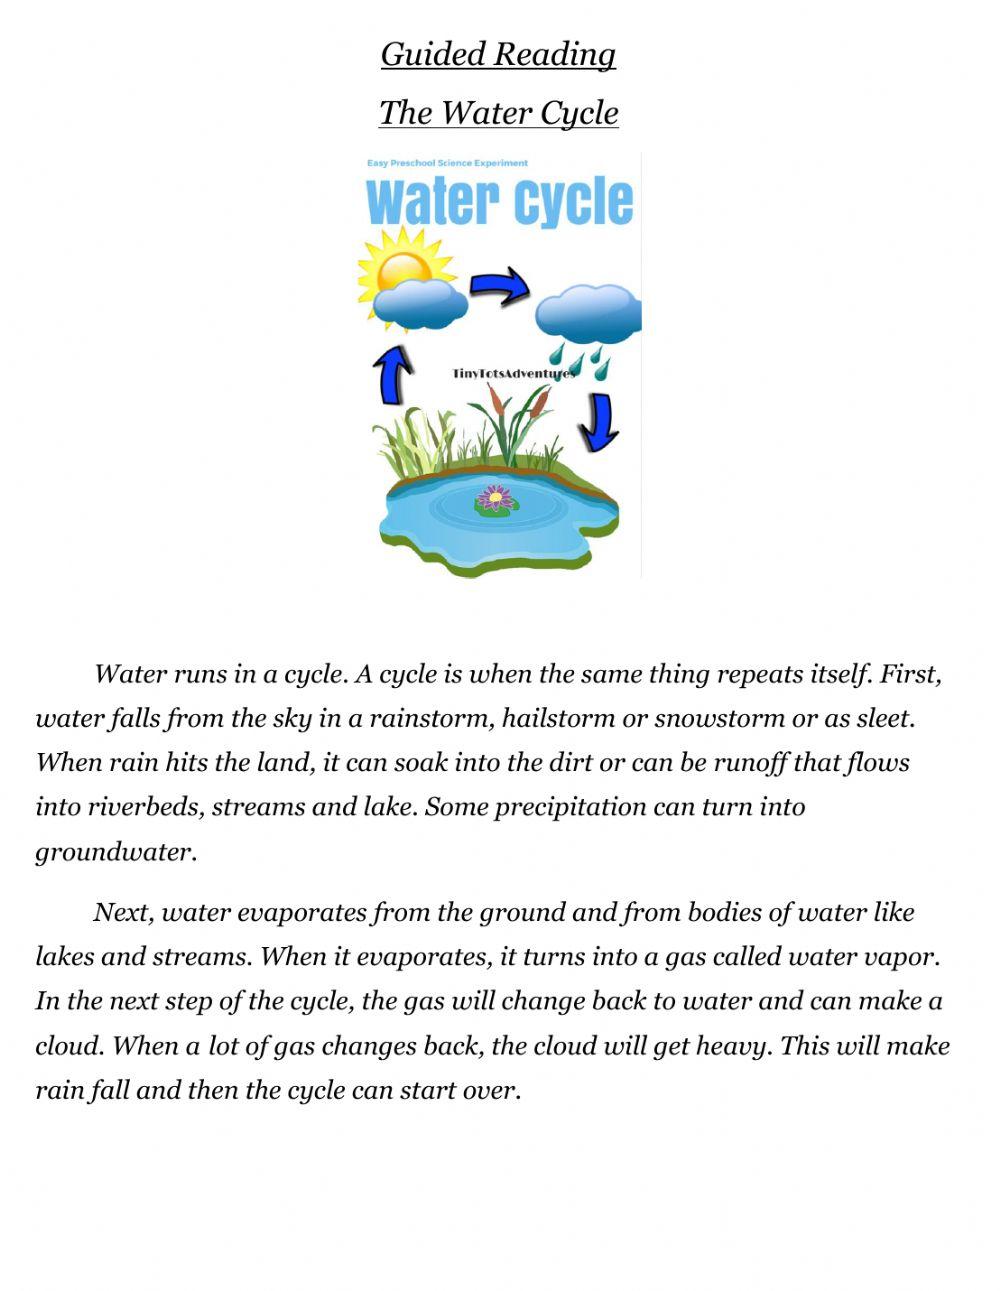 Guided Reading - The Water Cycle